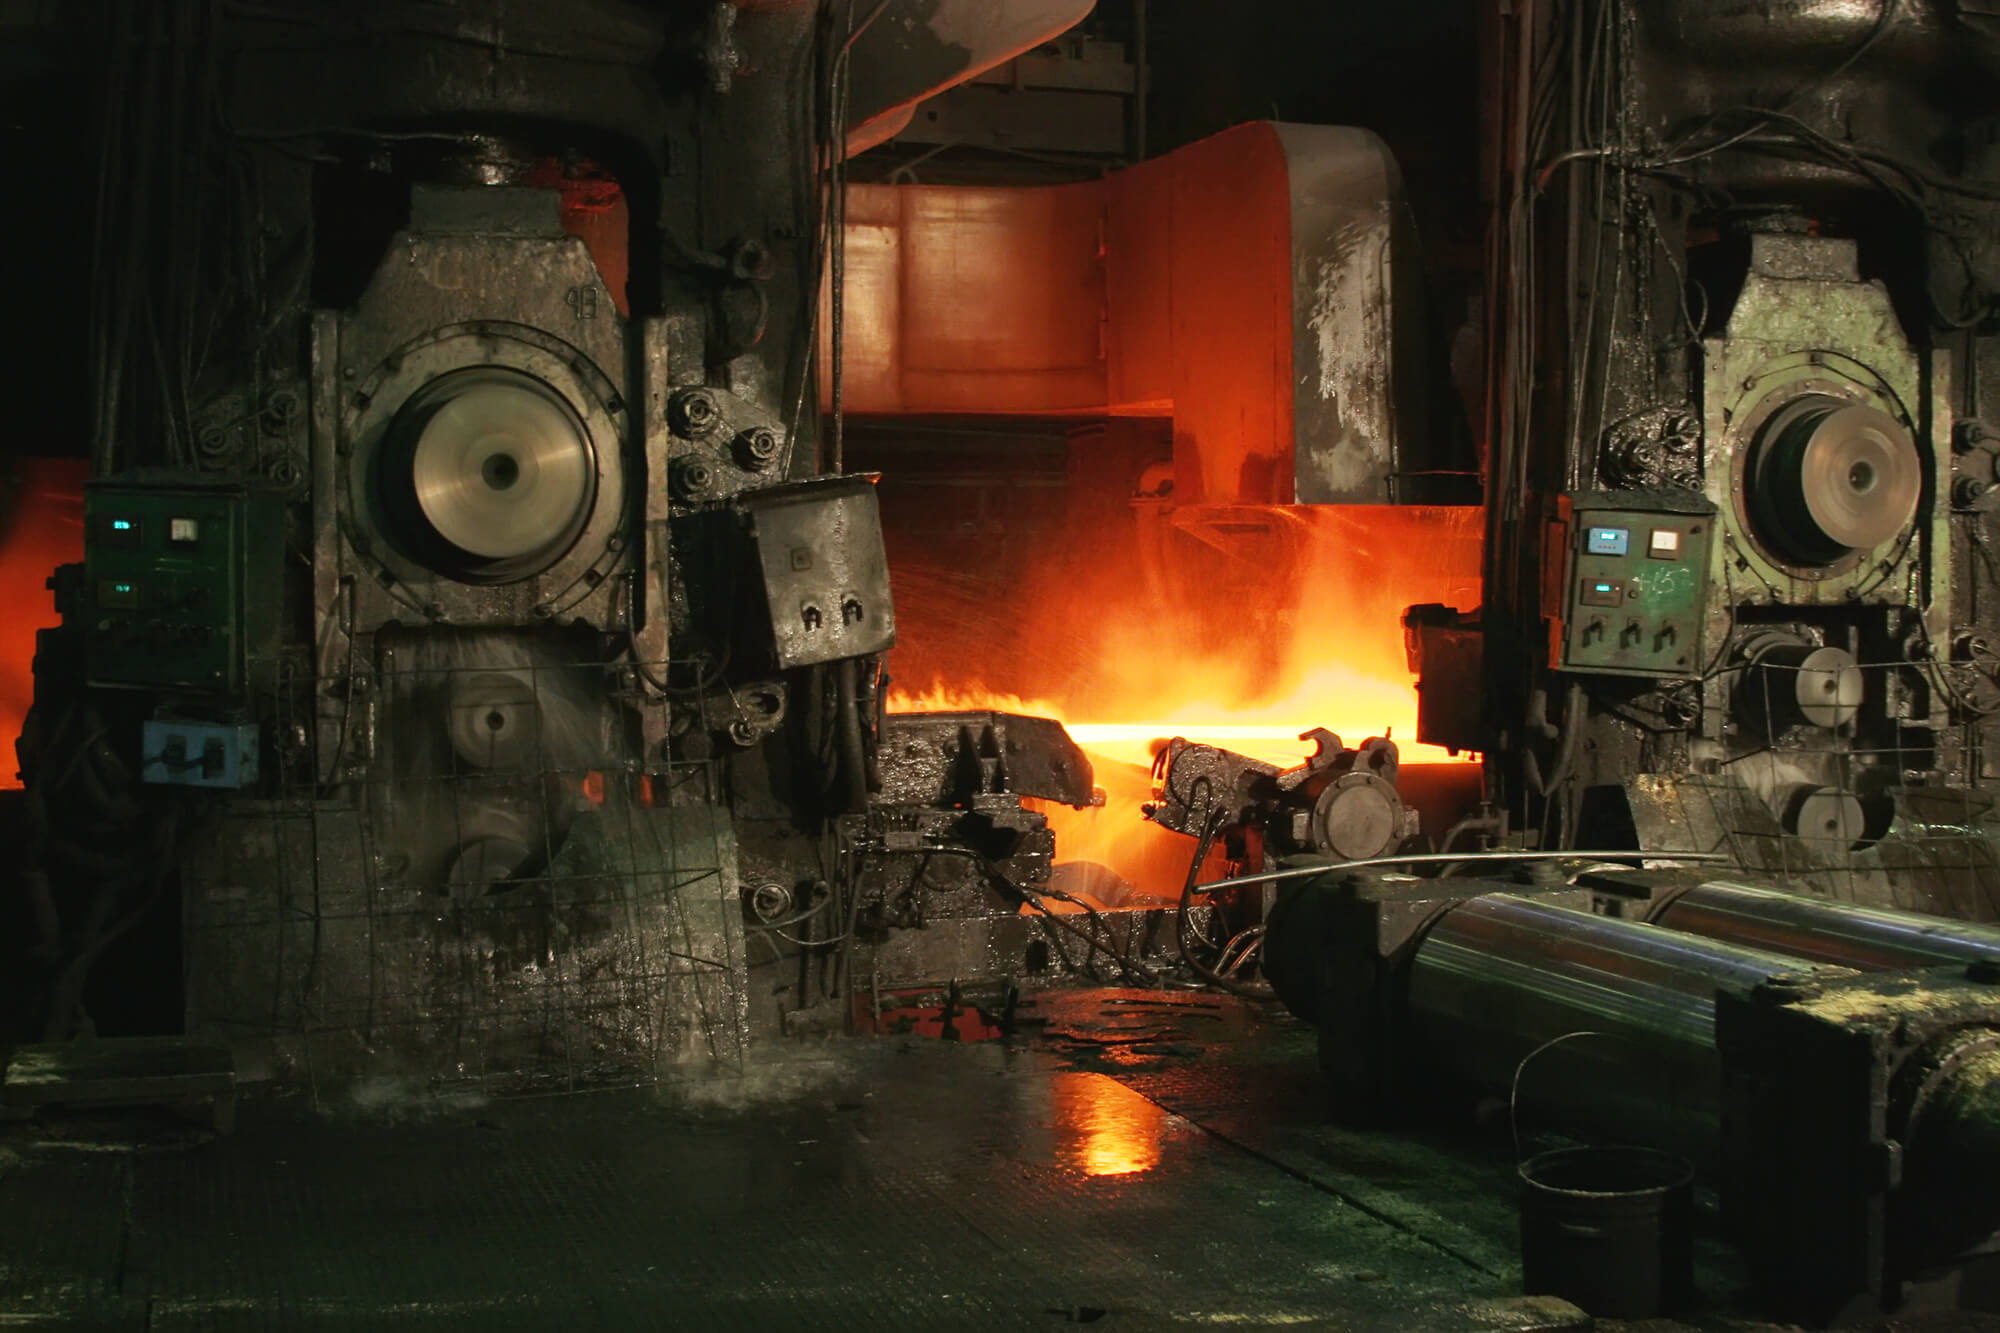 How Are Steel Forgings Made?